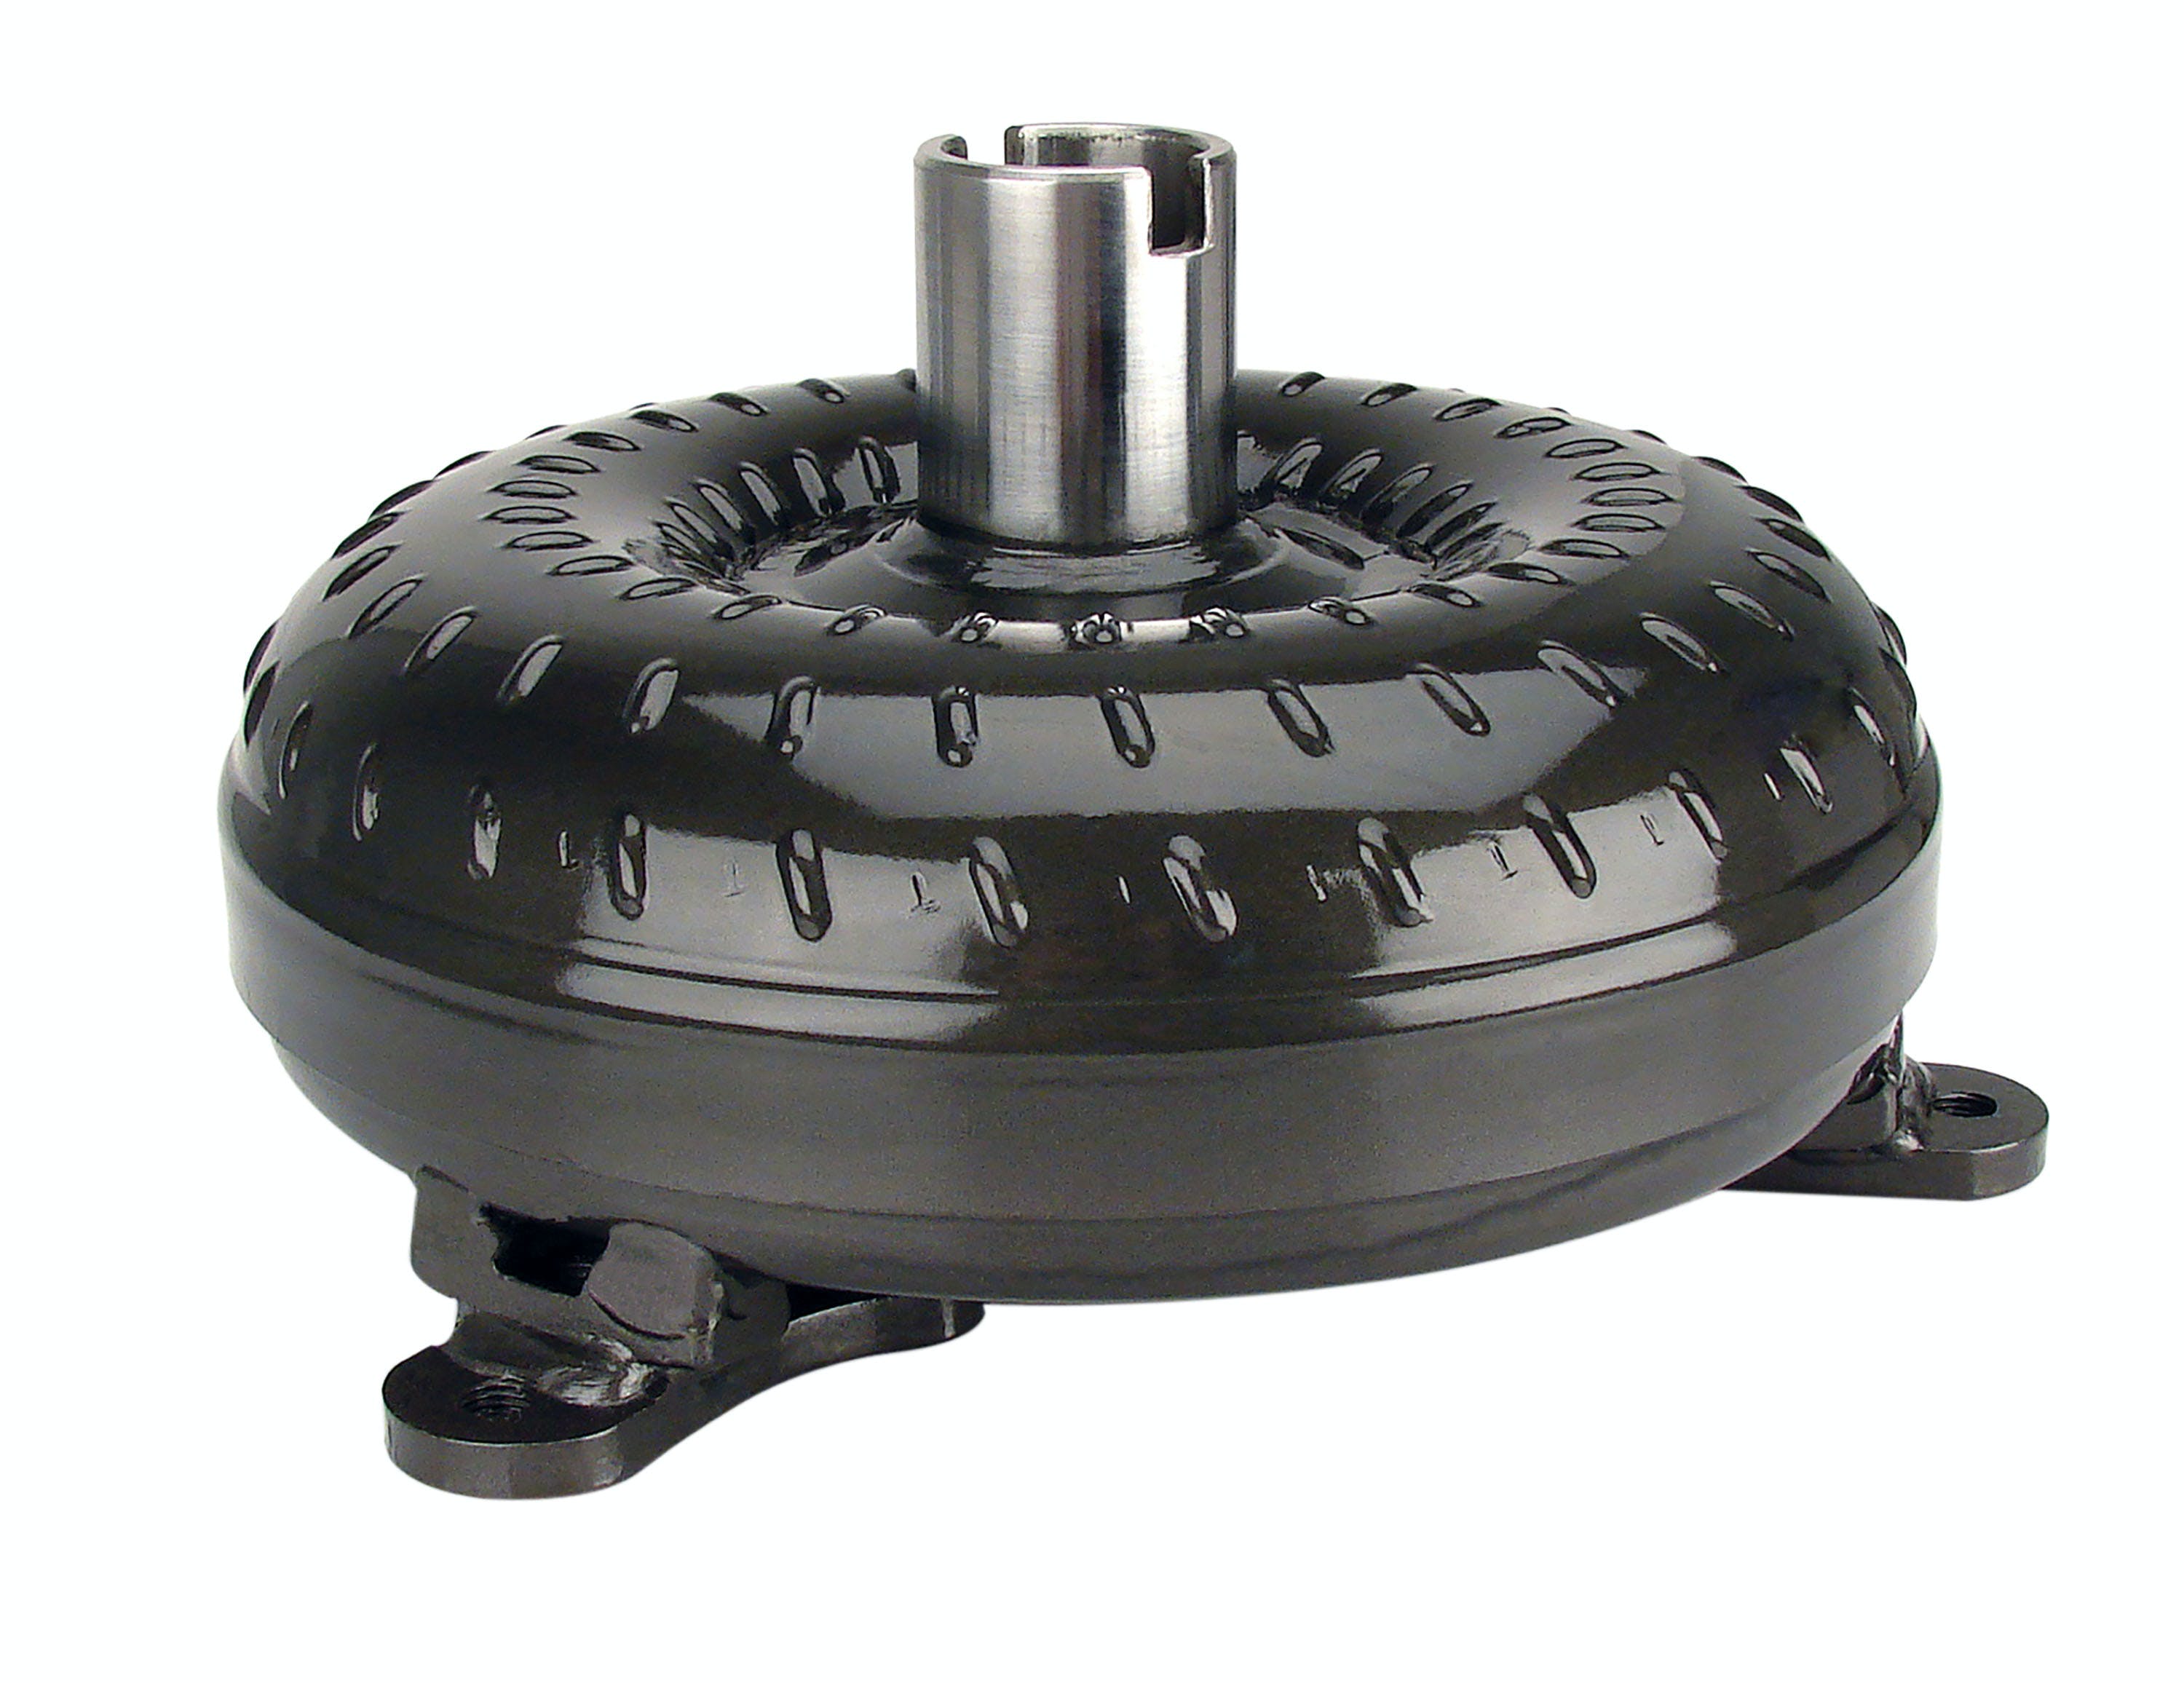 TCI Automotive 741050 Powerglide Non-Functional Torque Converter for Circle Track Applications